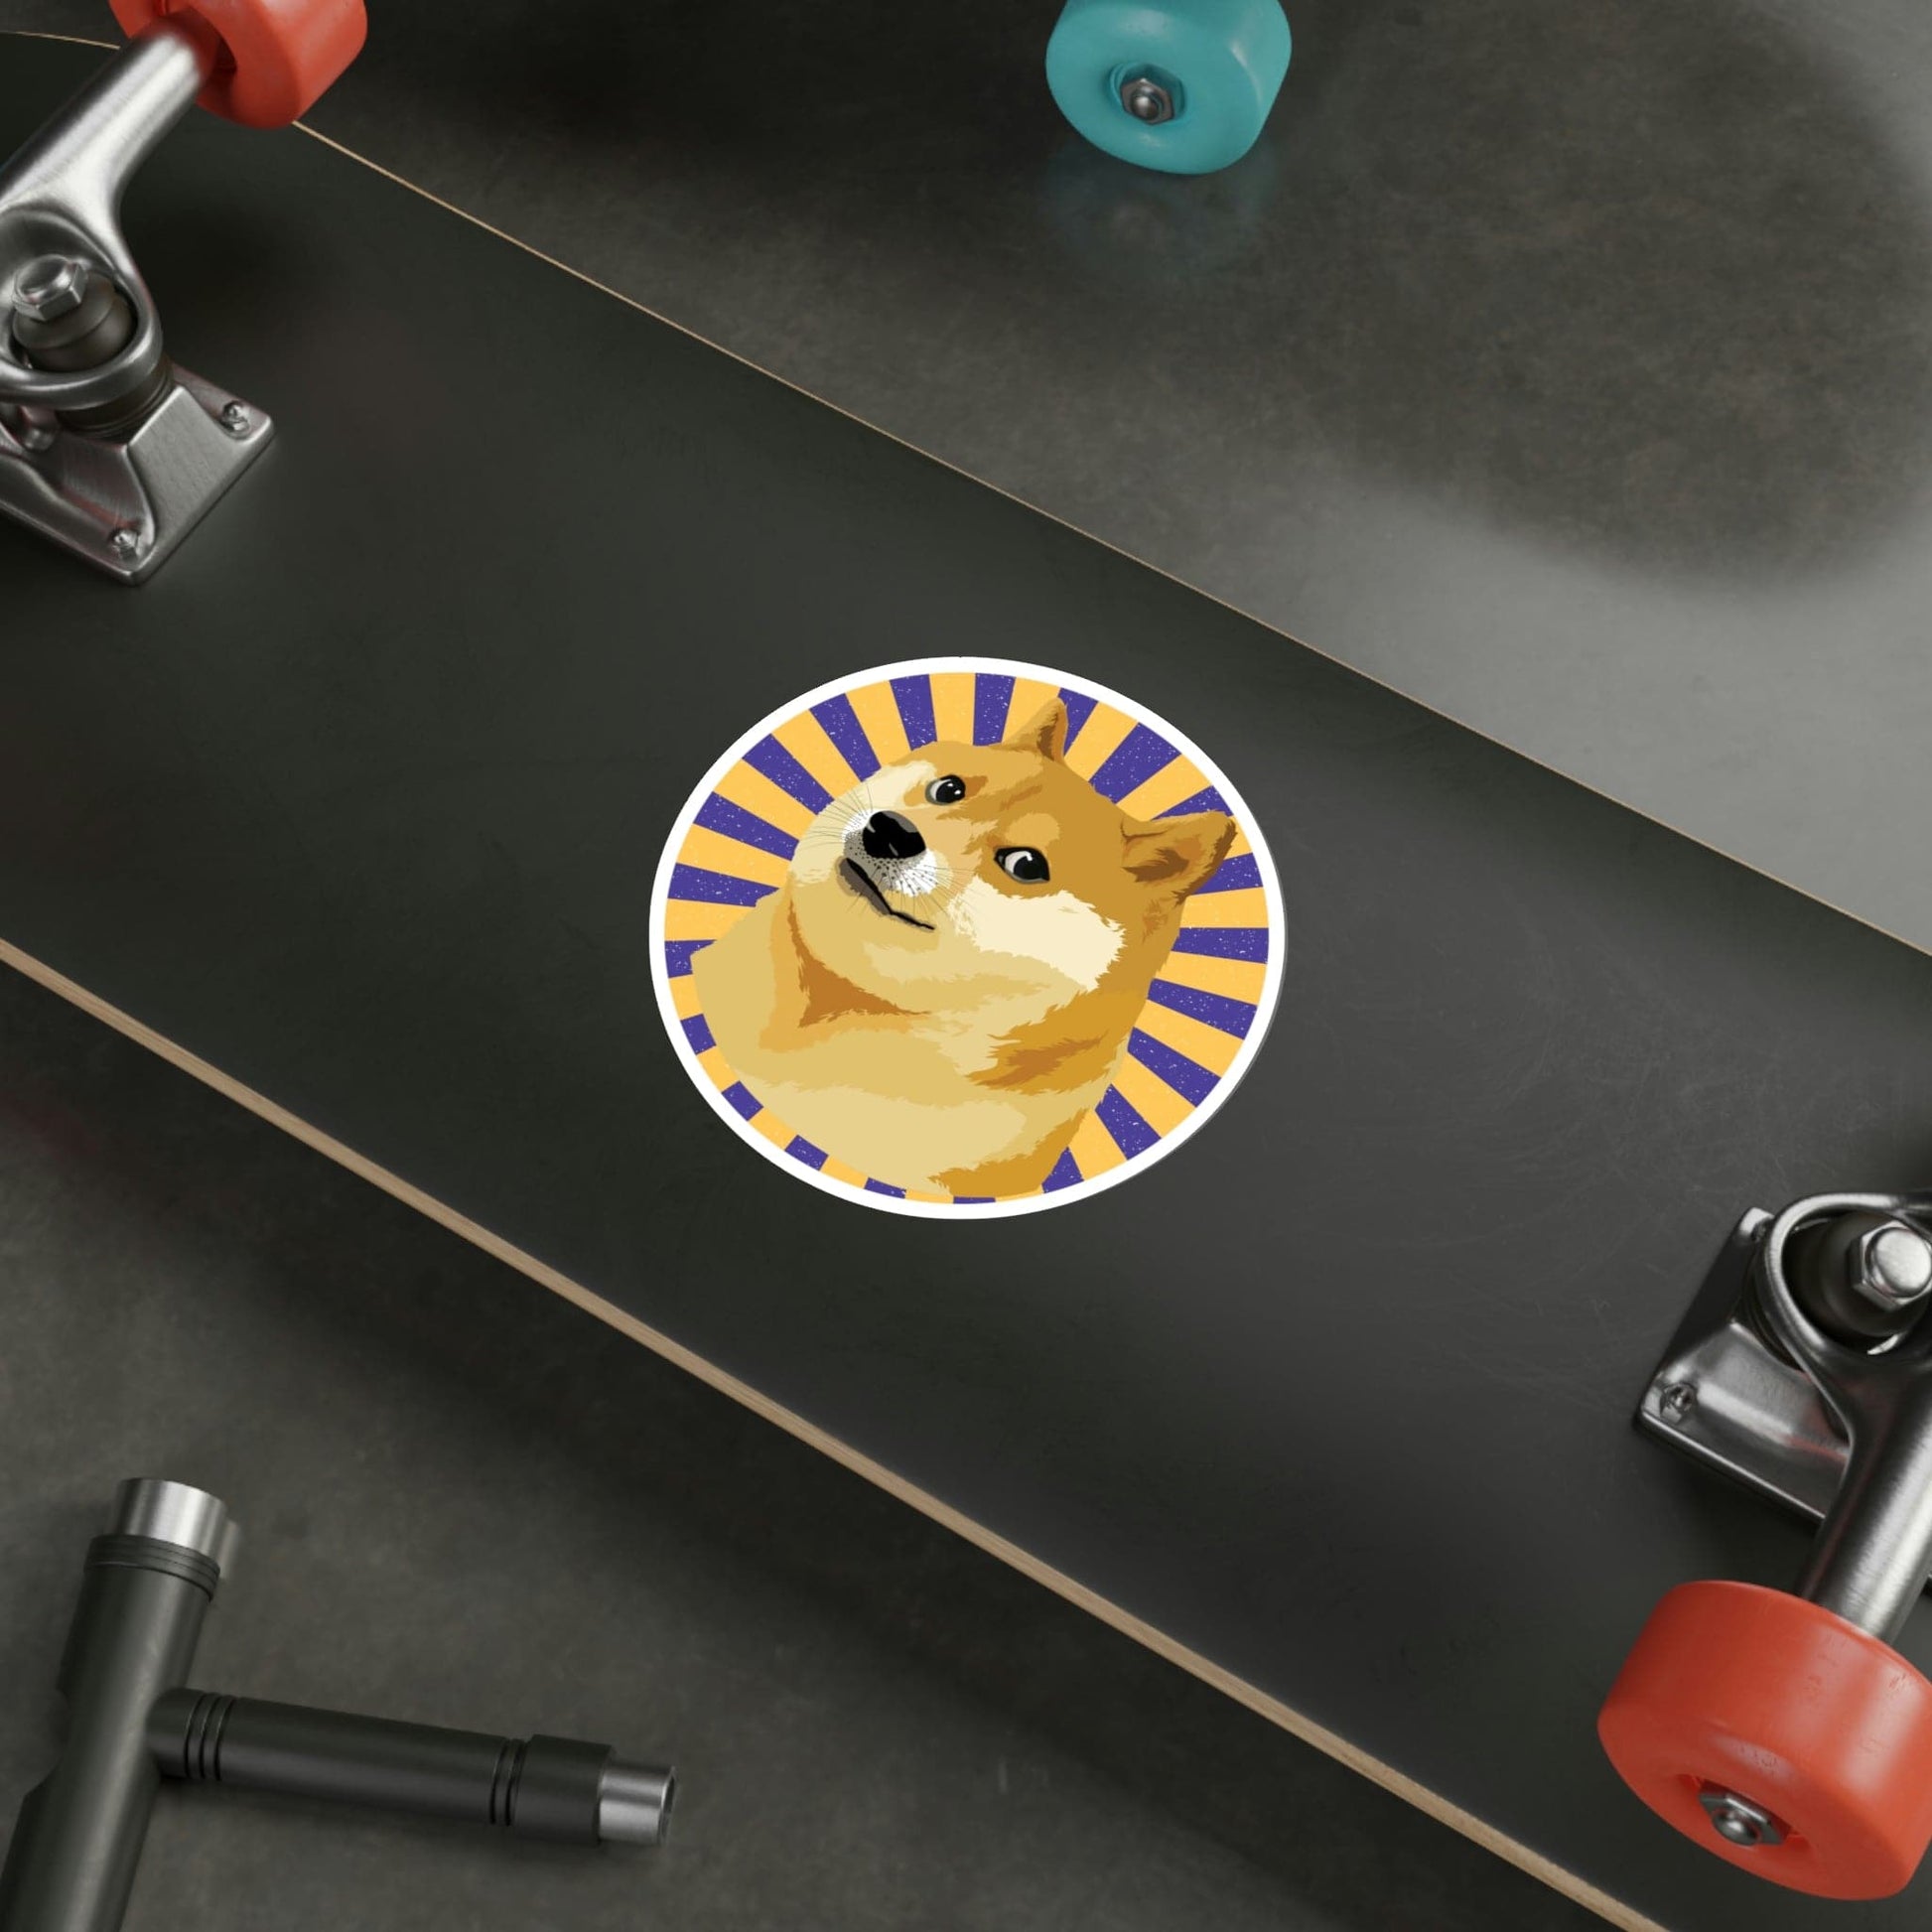 Dogecoin - 5" Sticker in the color: - Kaspers Tees